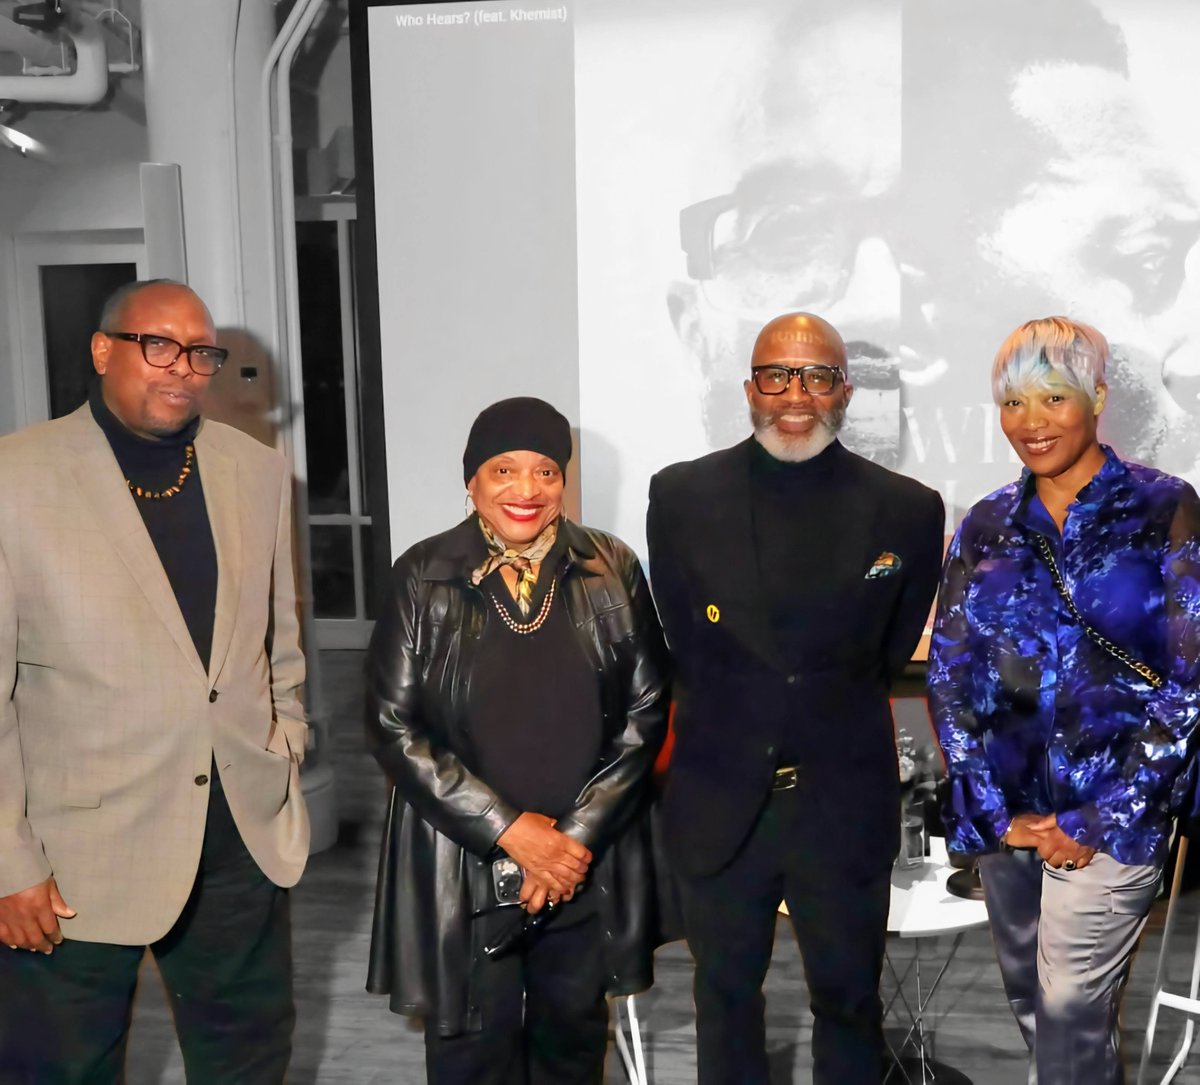 From a magical evening back in February, where we celebrated @DrGuyMusiQology's Who Hears Here? On Black Music Pasts and Present ucpress.edu/book/978052028…